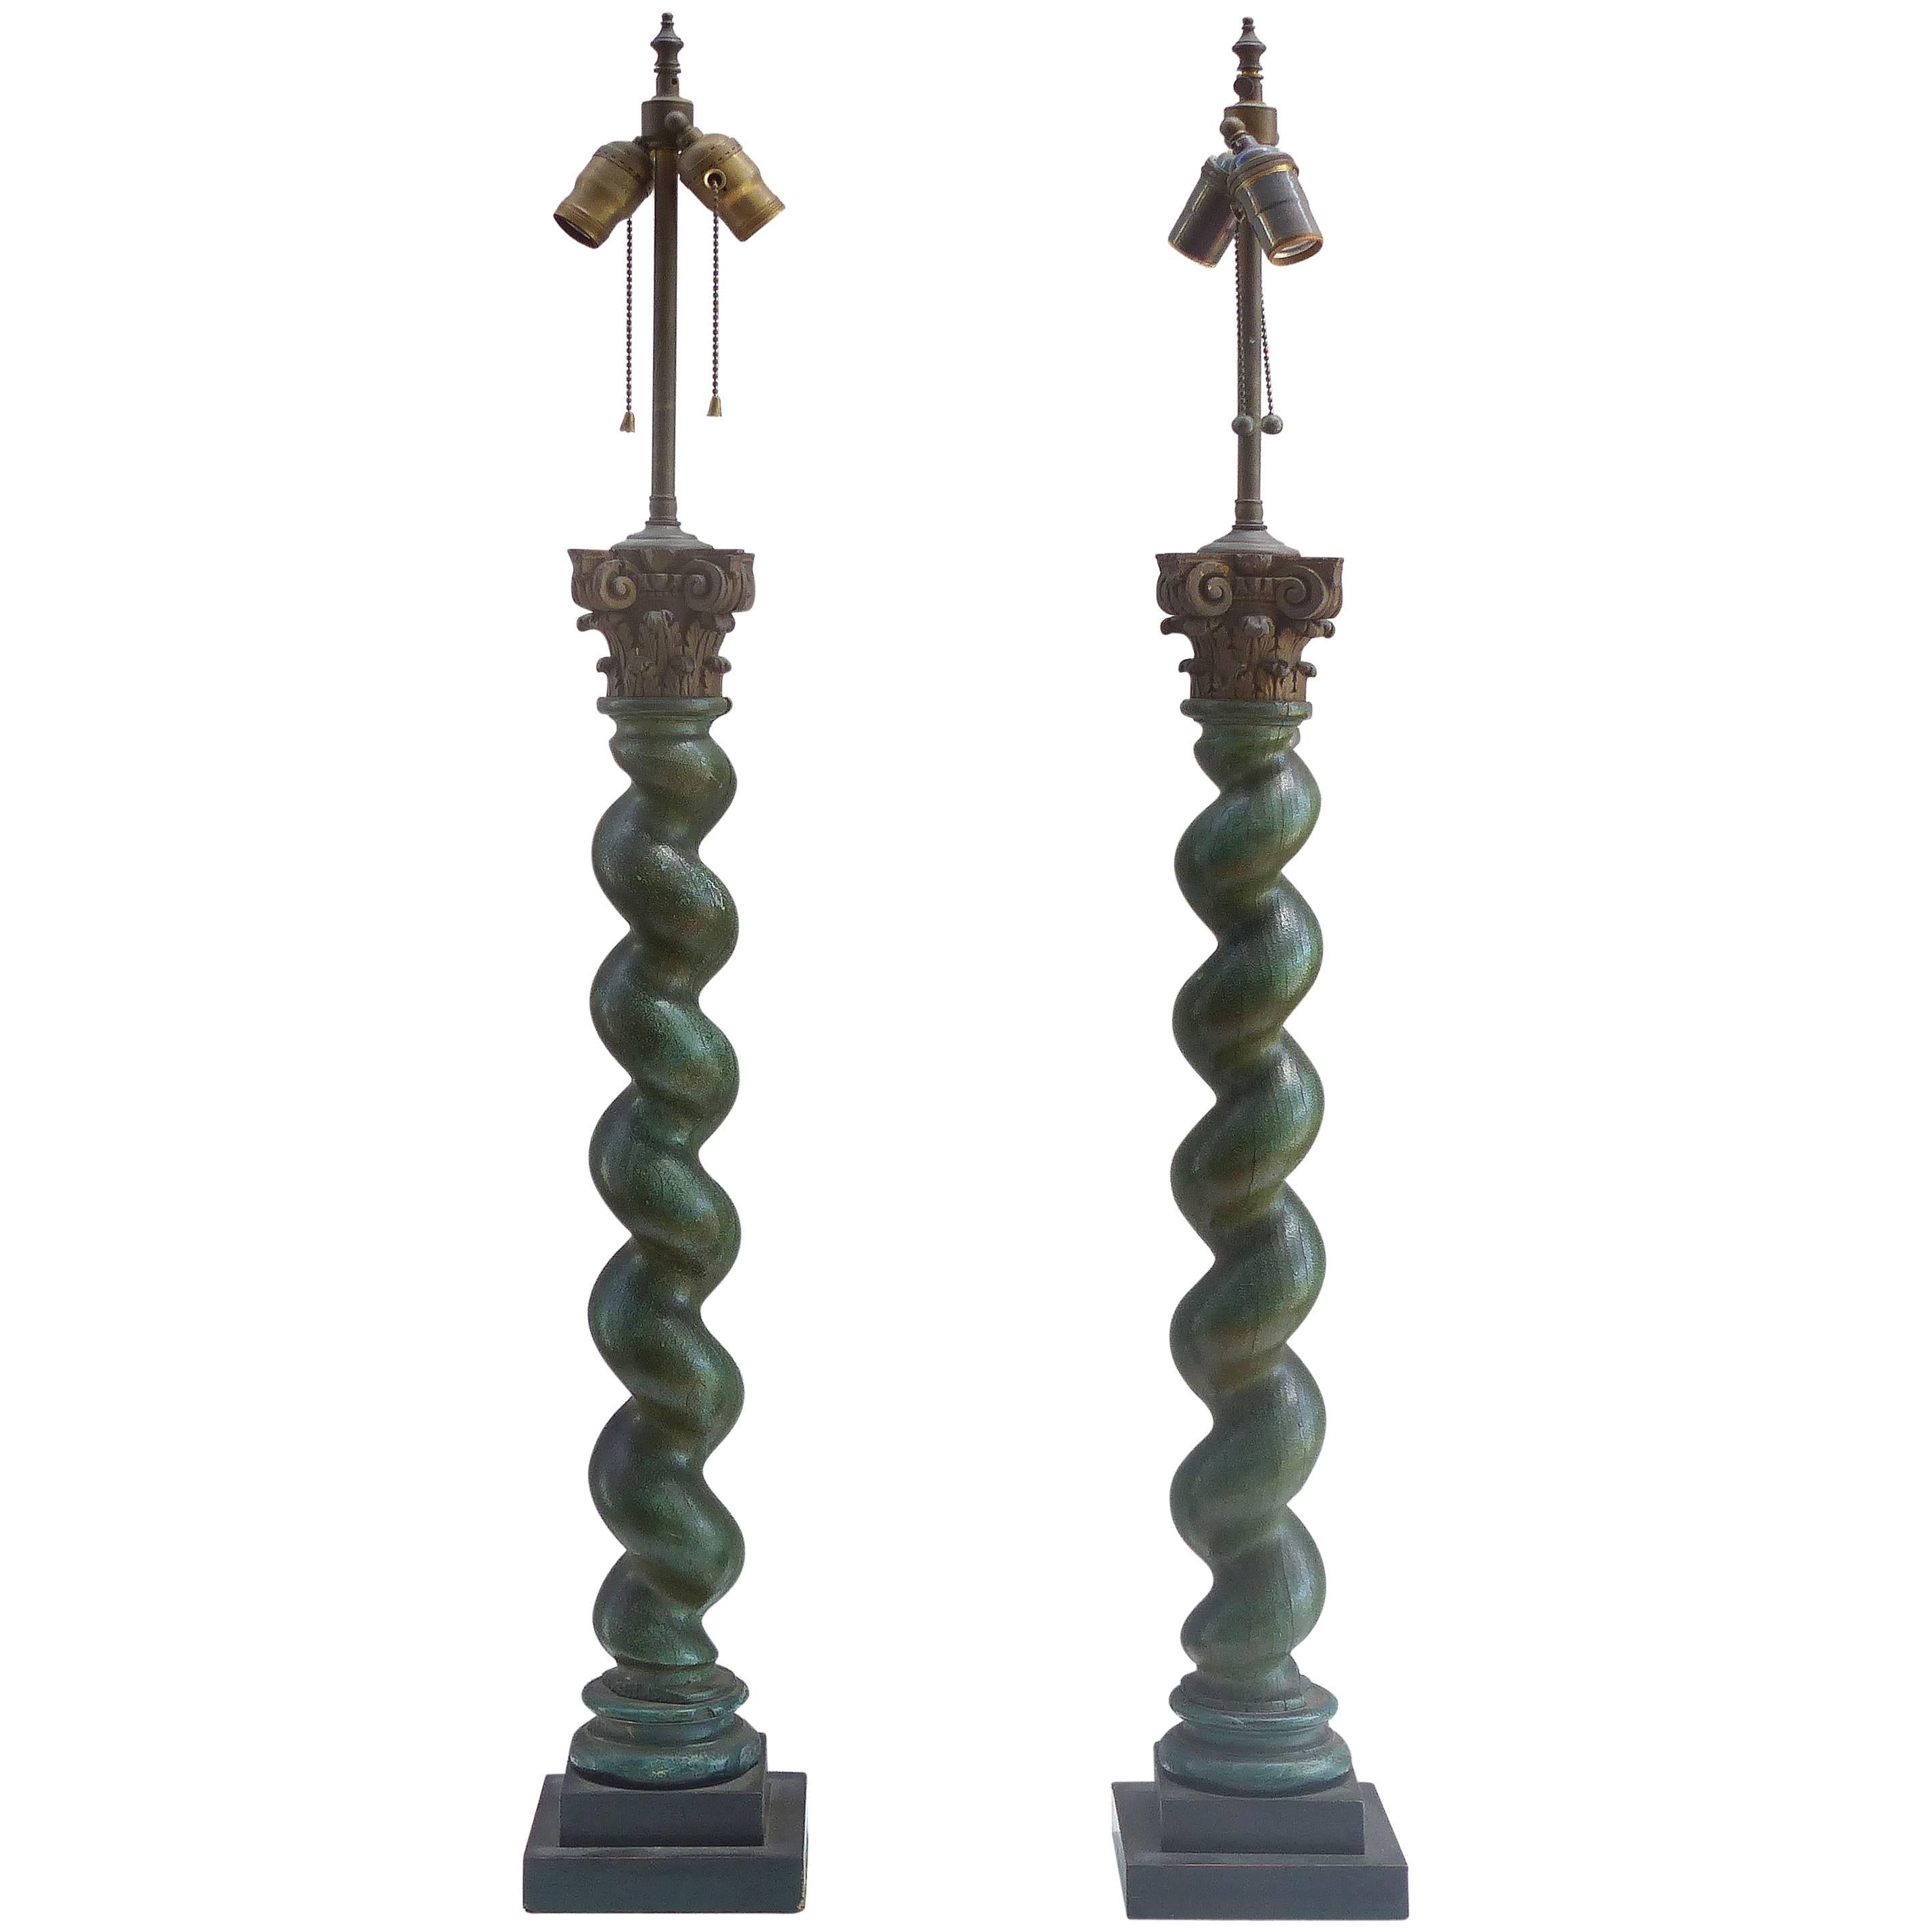 Neoclassical Revival carved barley twist Corinthian column table lamps, pair

Offered for sale is a pair of tall carved neoclassical Revival barley twist Corinthian column table lamps. These early lamps are a true matched pair having been carved